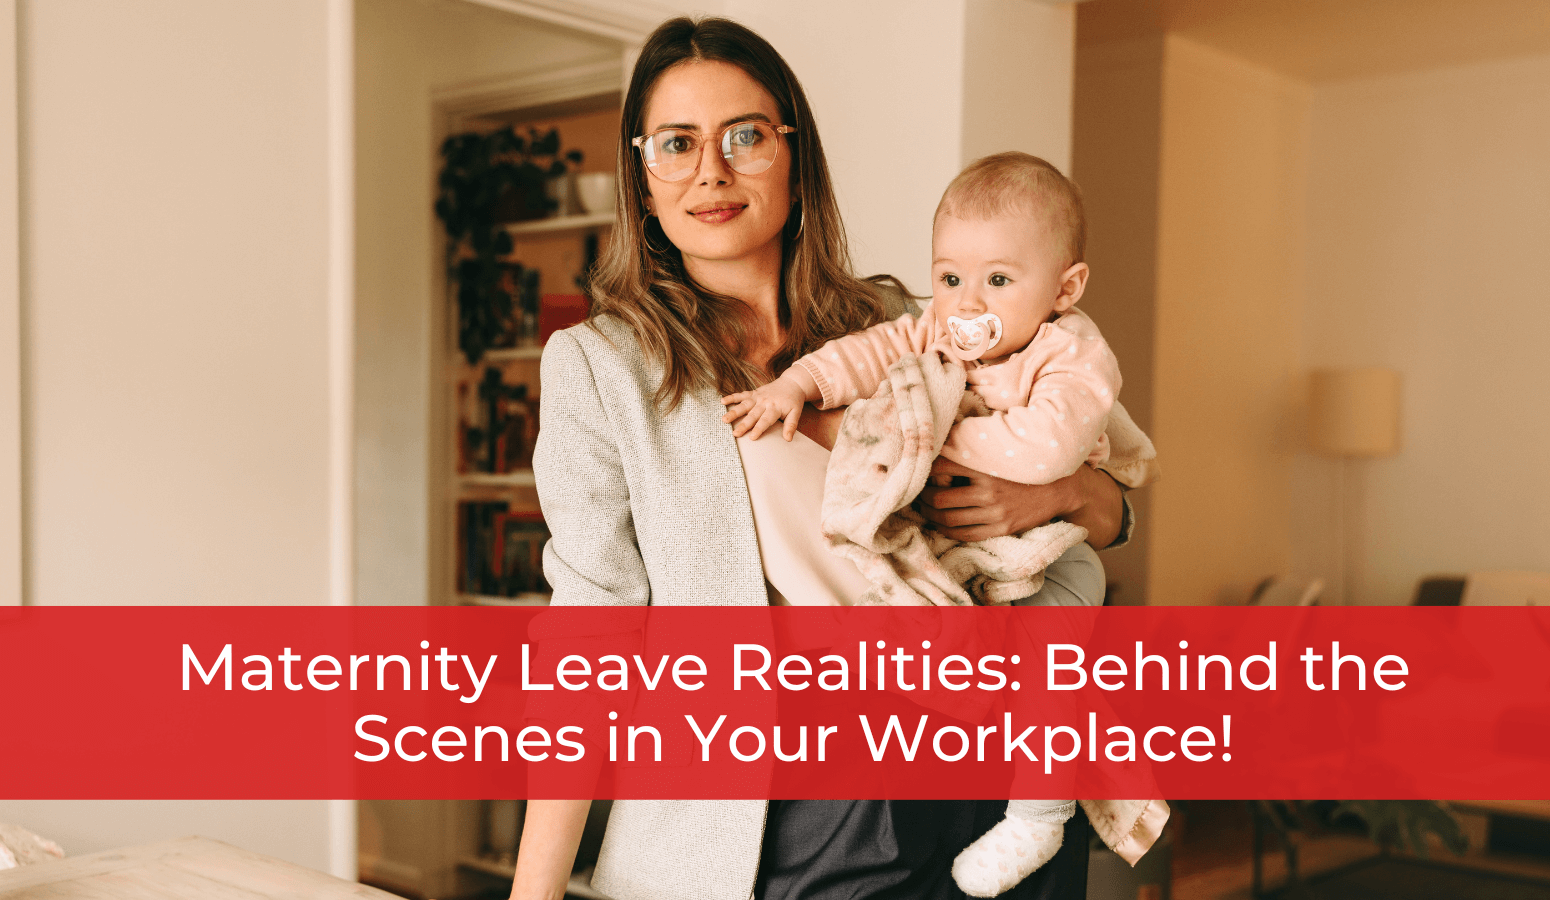 Featured image for “Maternity Leave Realities: Behind the Scenes in Your Workplace!”